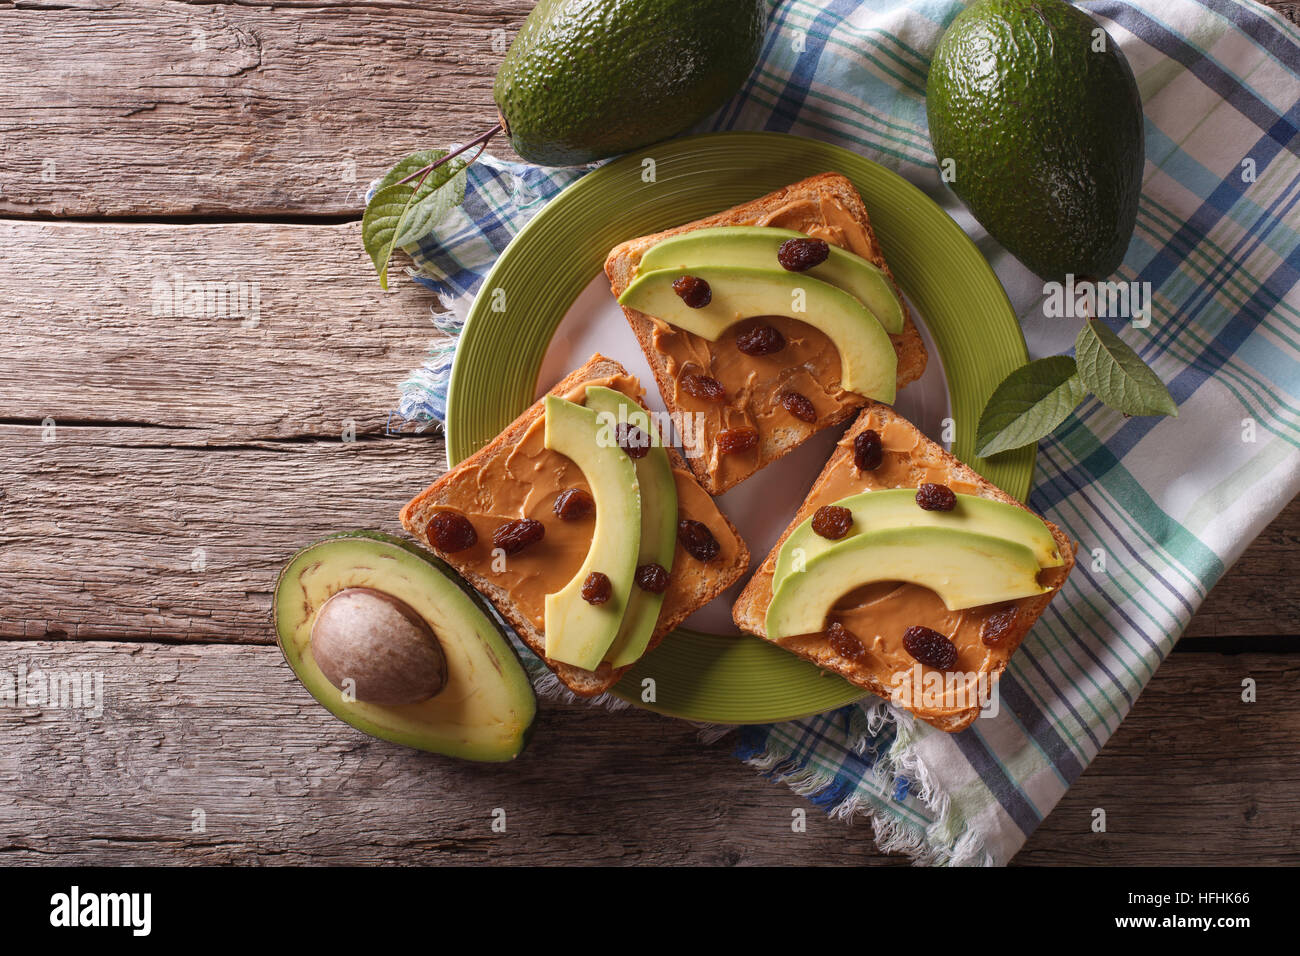 Homemade sandwiches with peanut butter, raisins and avocado on a plate. horizontal top view Stock Photo